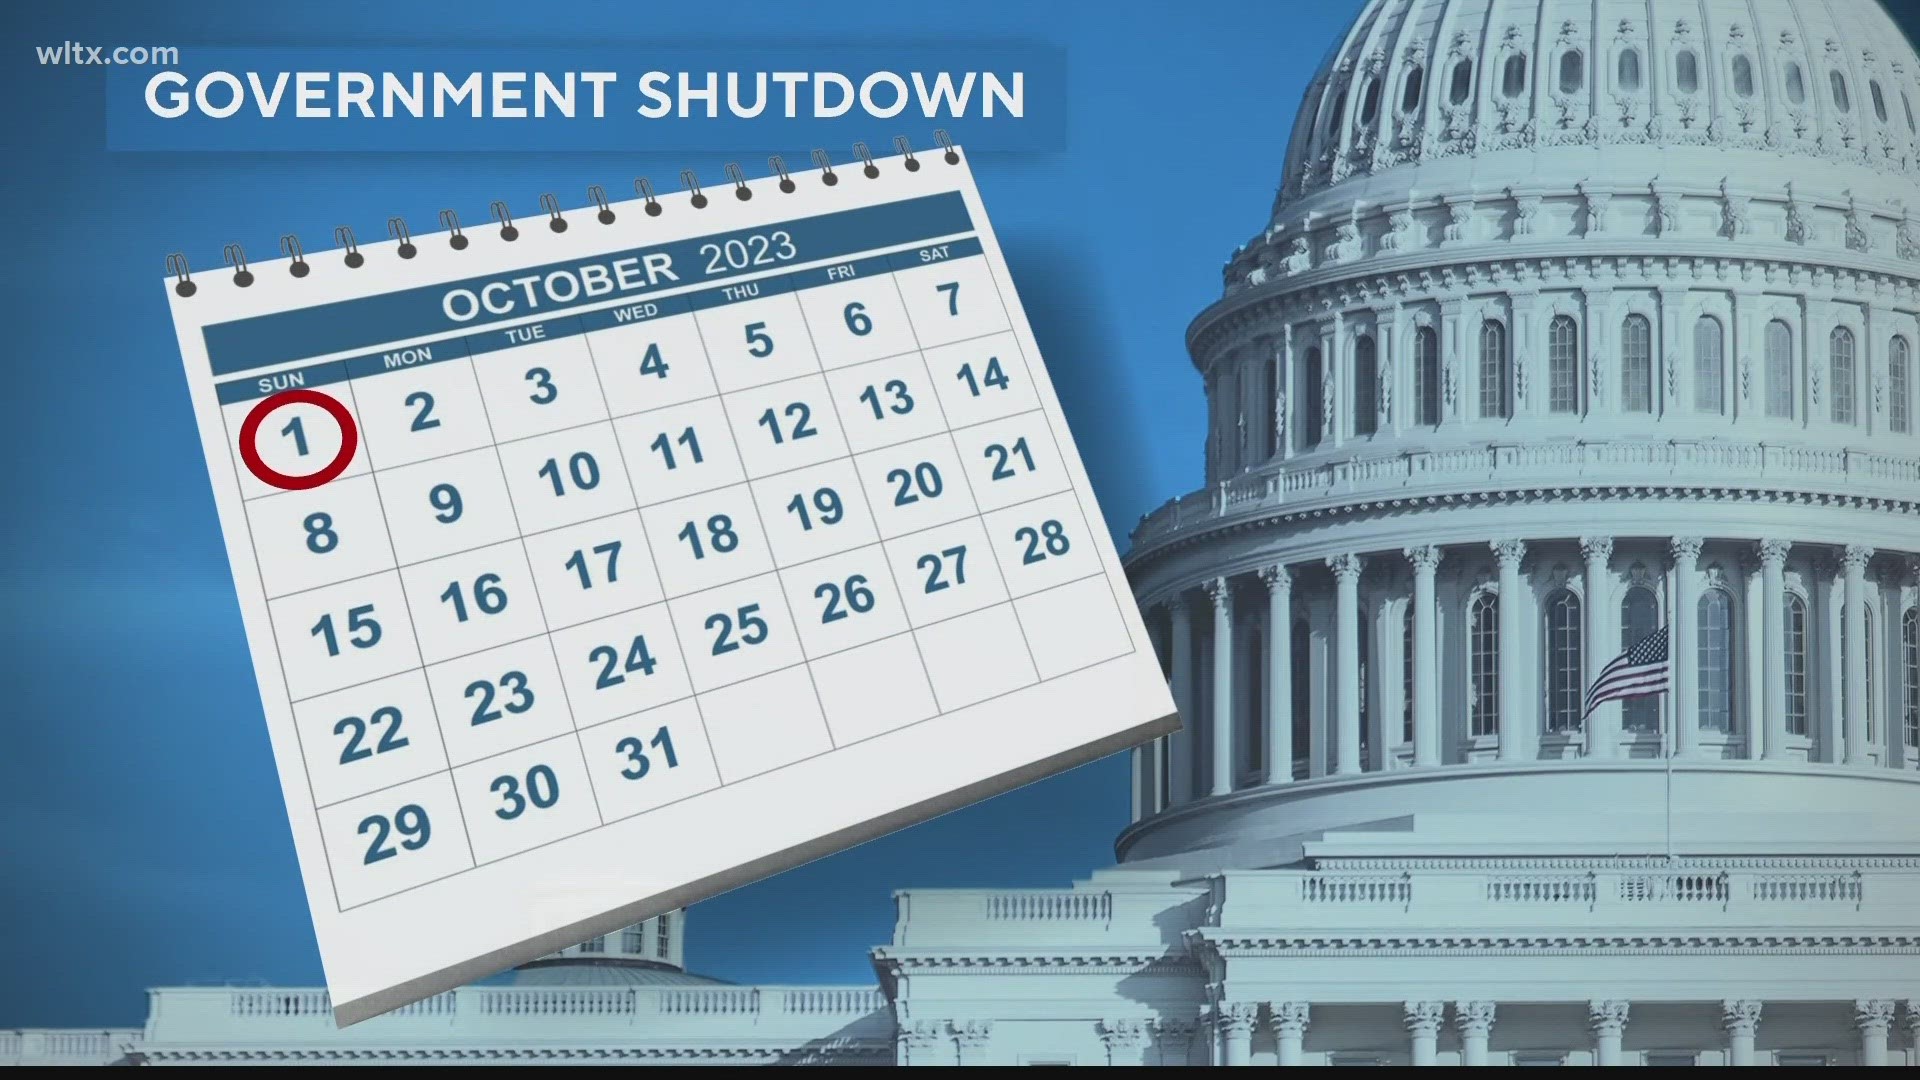 Congress has only a handful of working days left to keep the government funded.